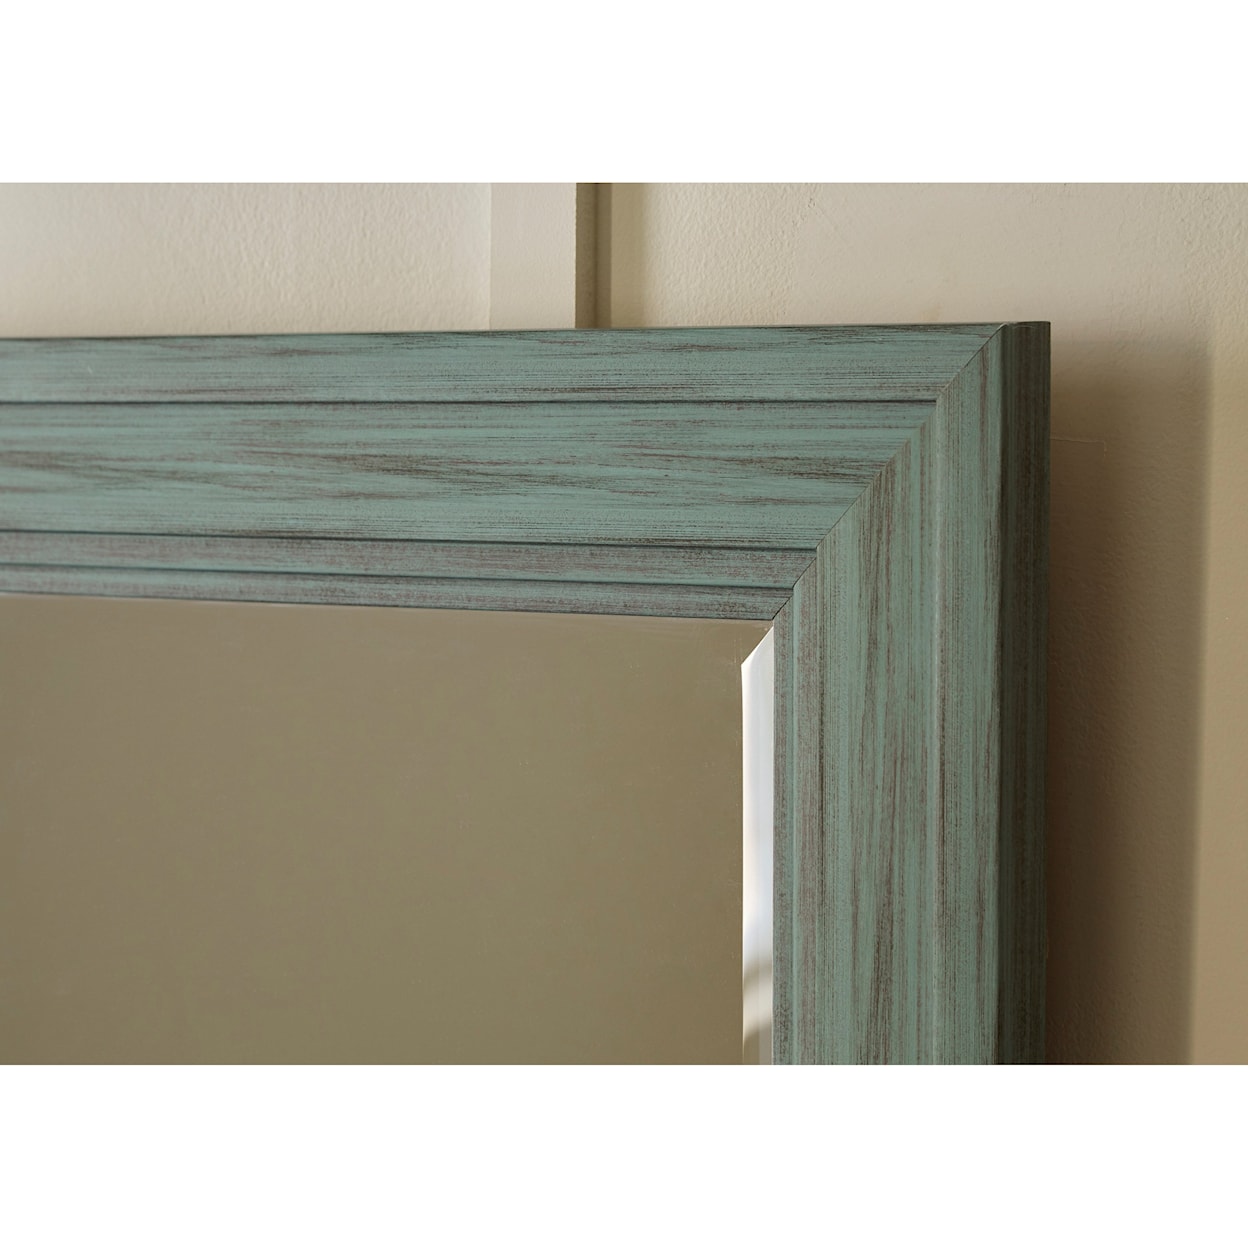 Benchcraft Accent Mirrors Jacee Antique Teal Accent Mirror